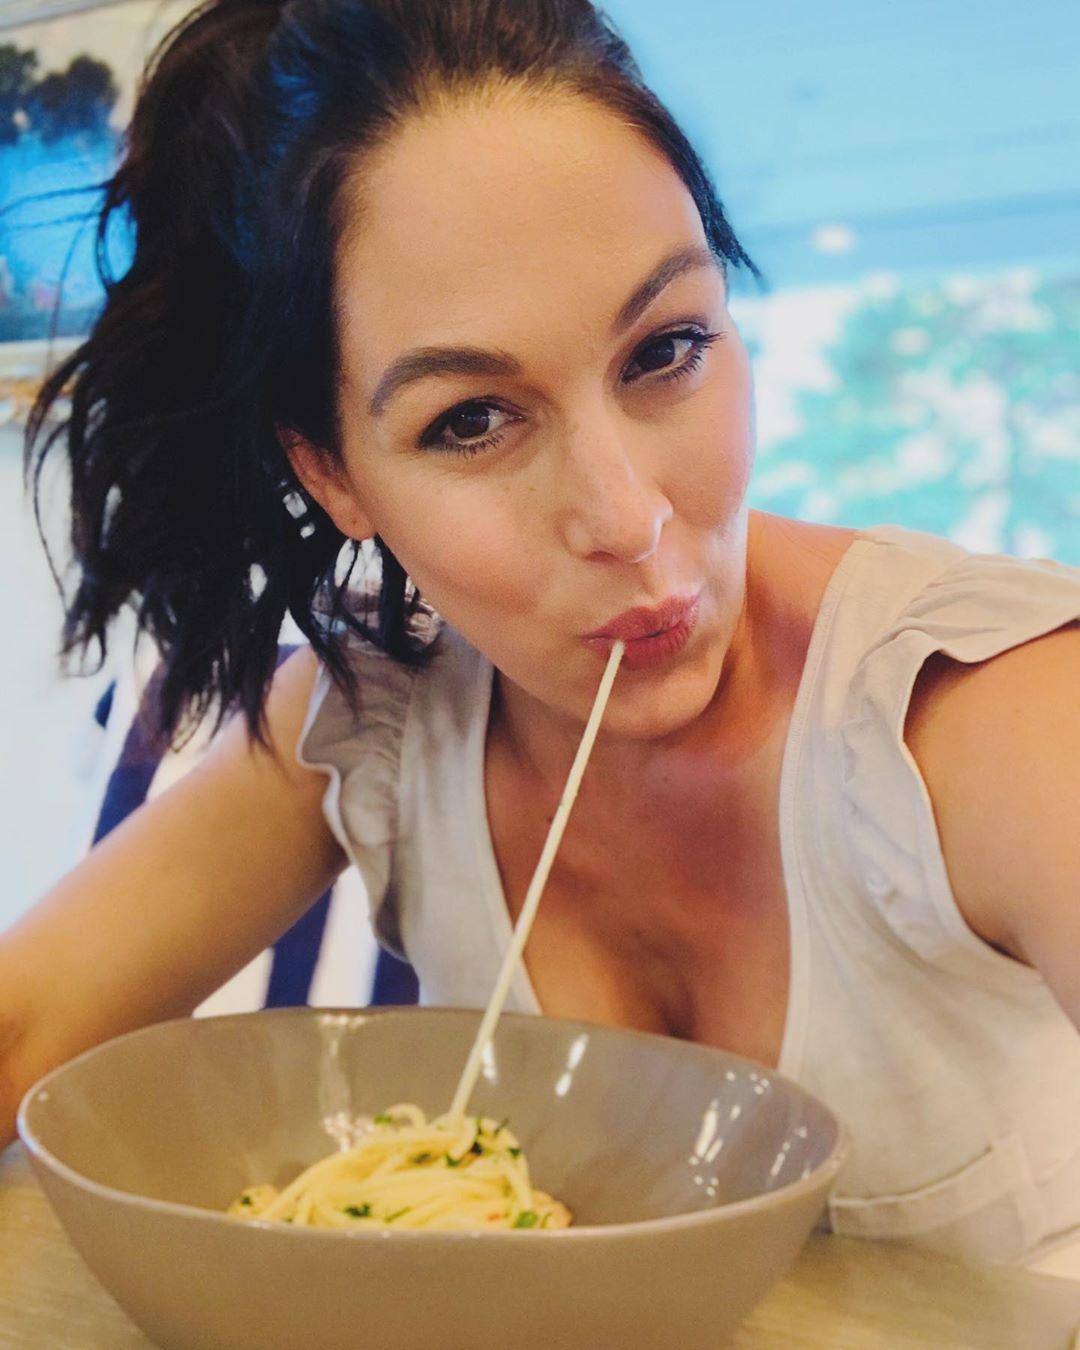 60+ Hot Pictures of Brie Bella Will Drive You Nuts For Her 198